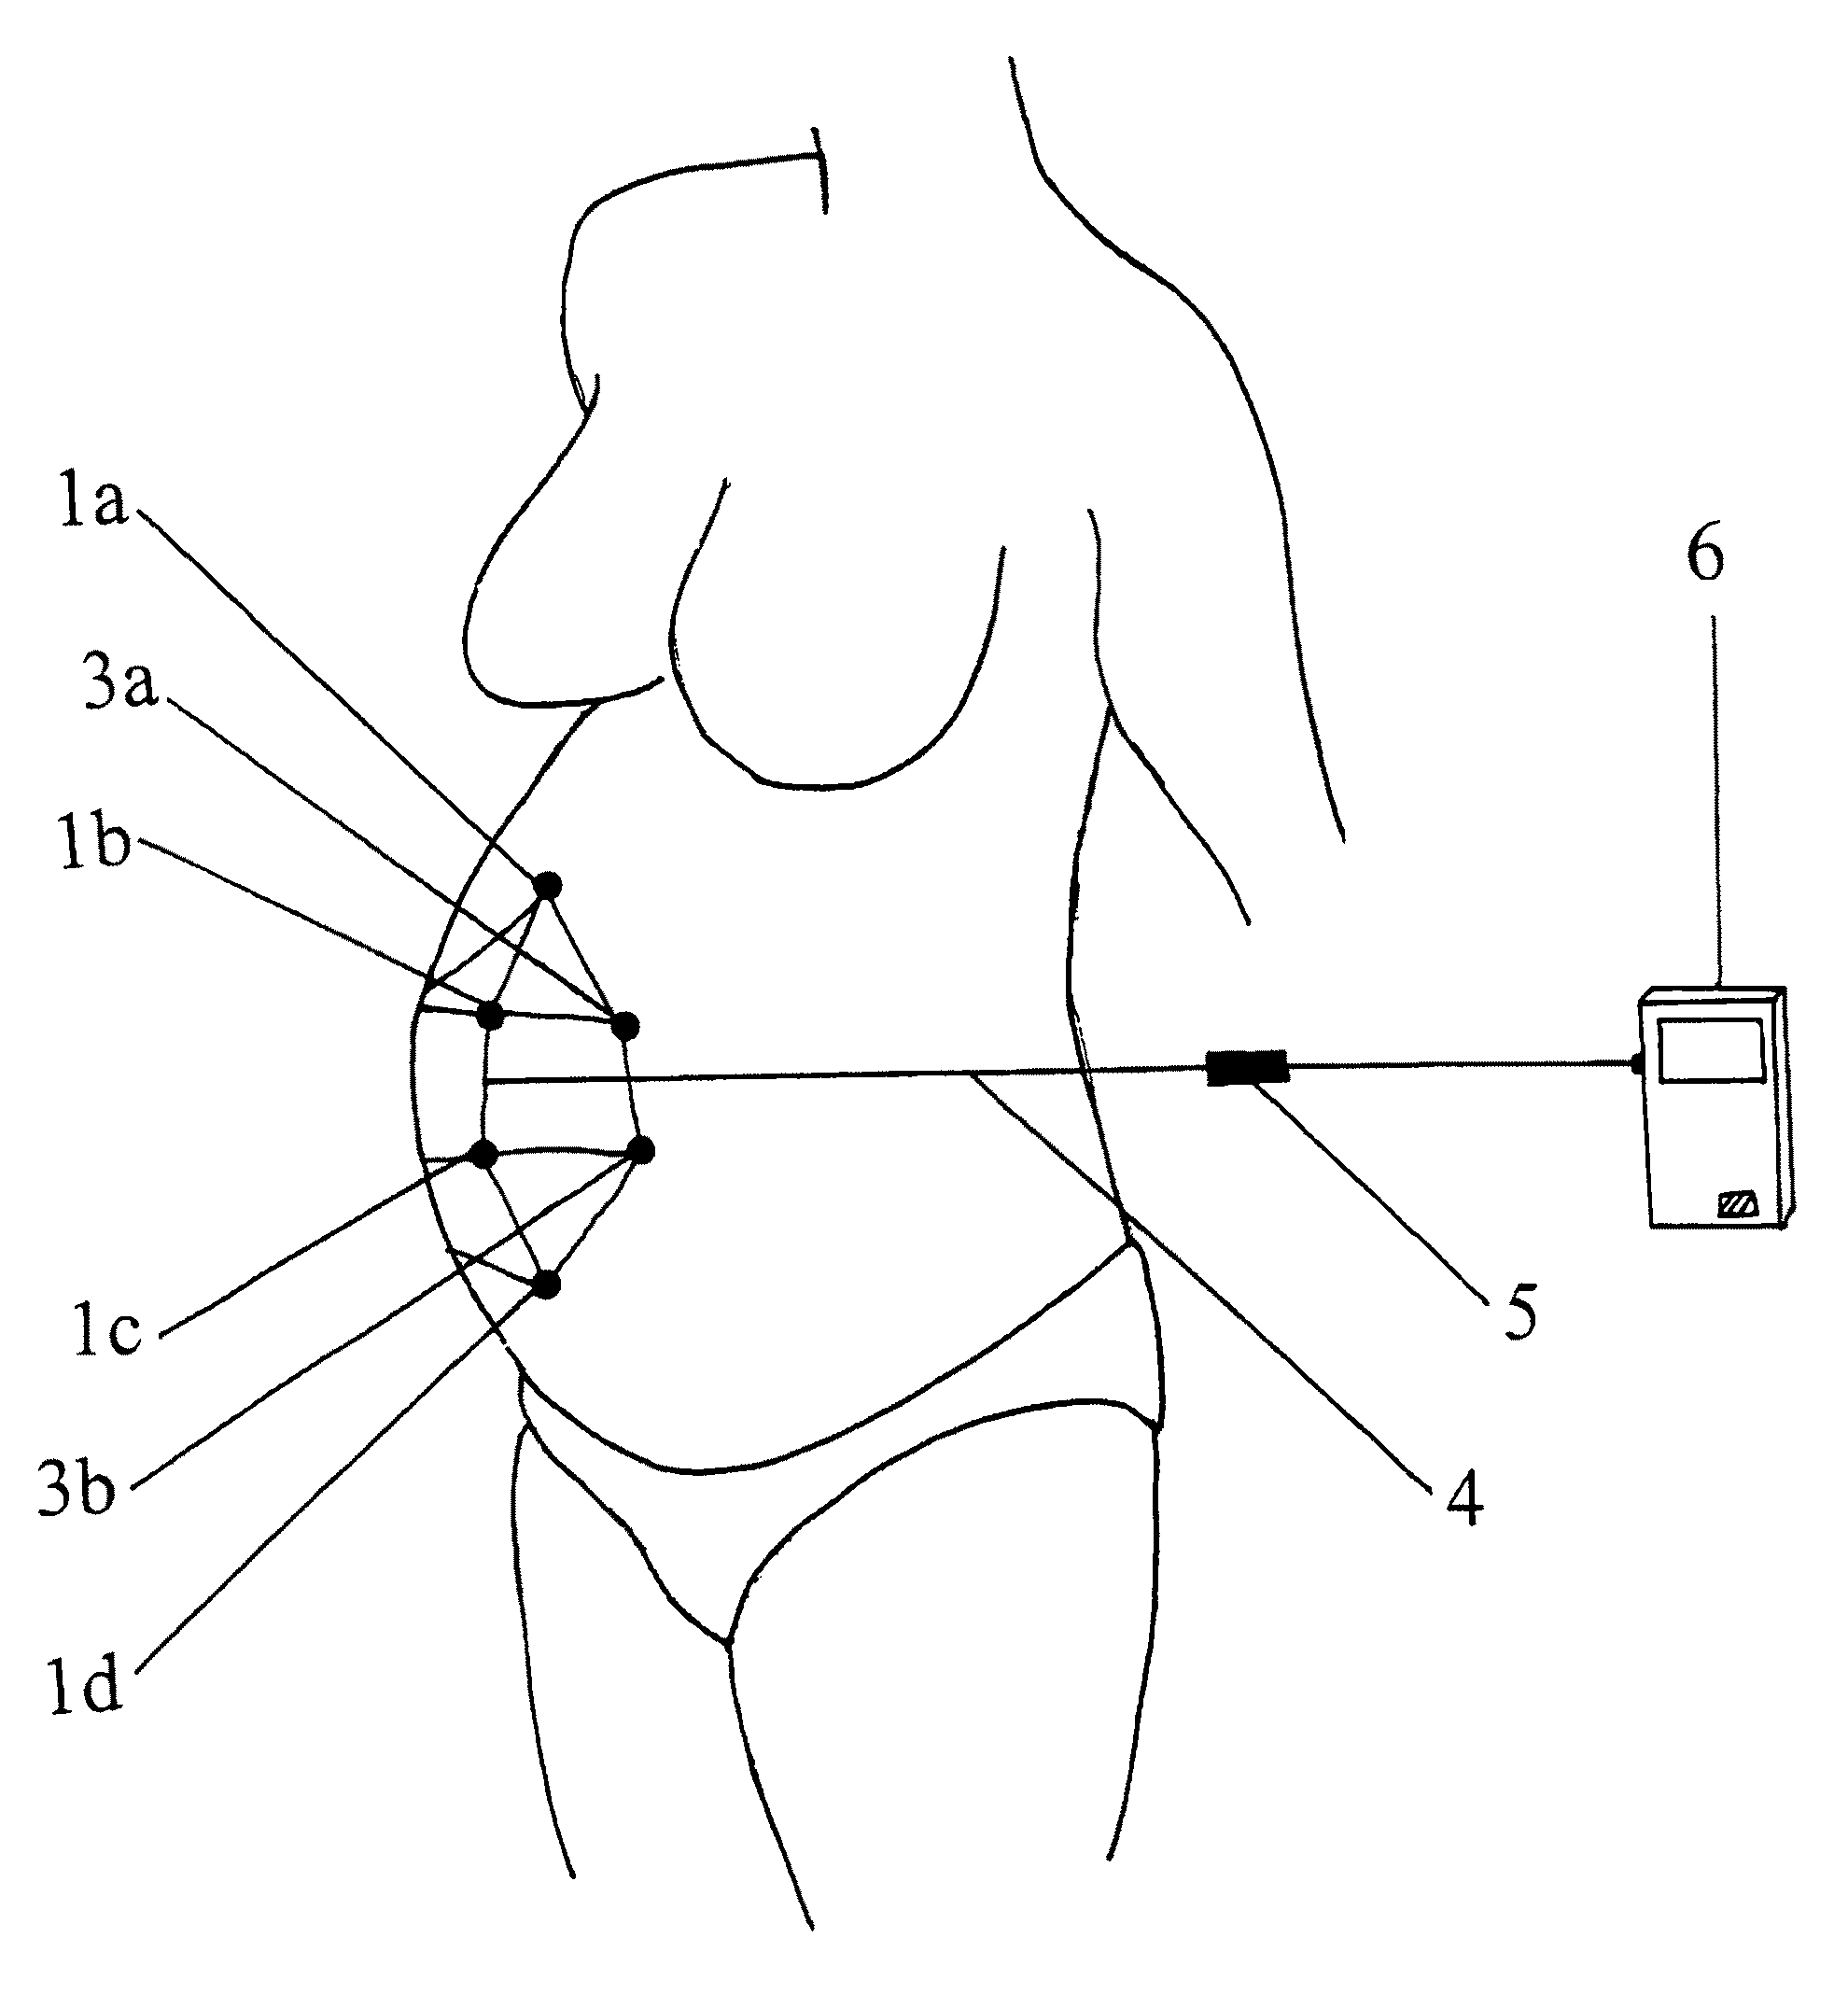 Obstetric analgesia system